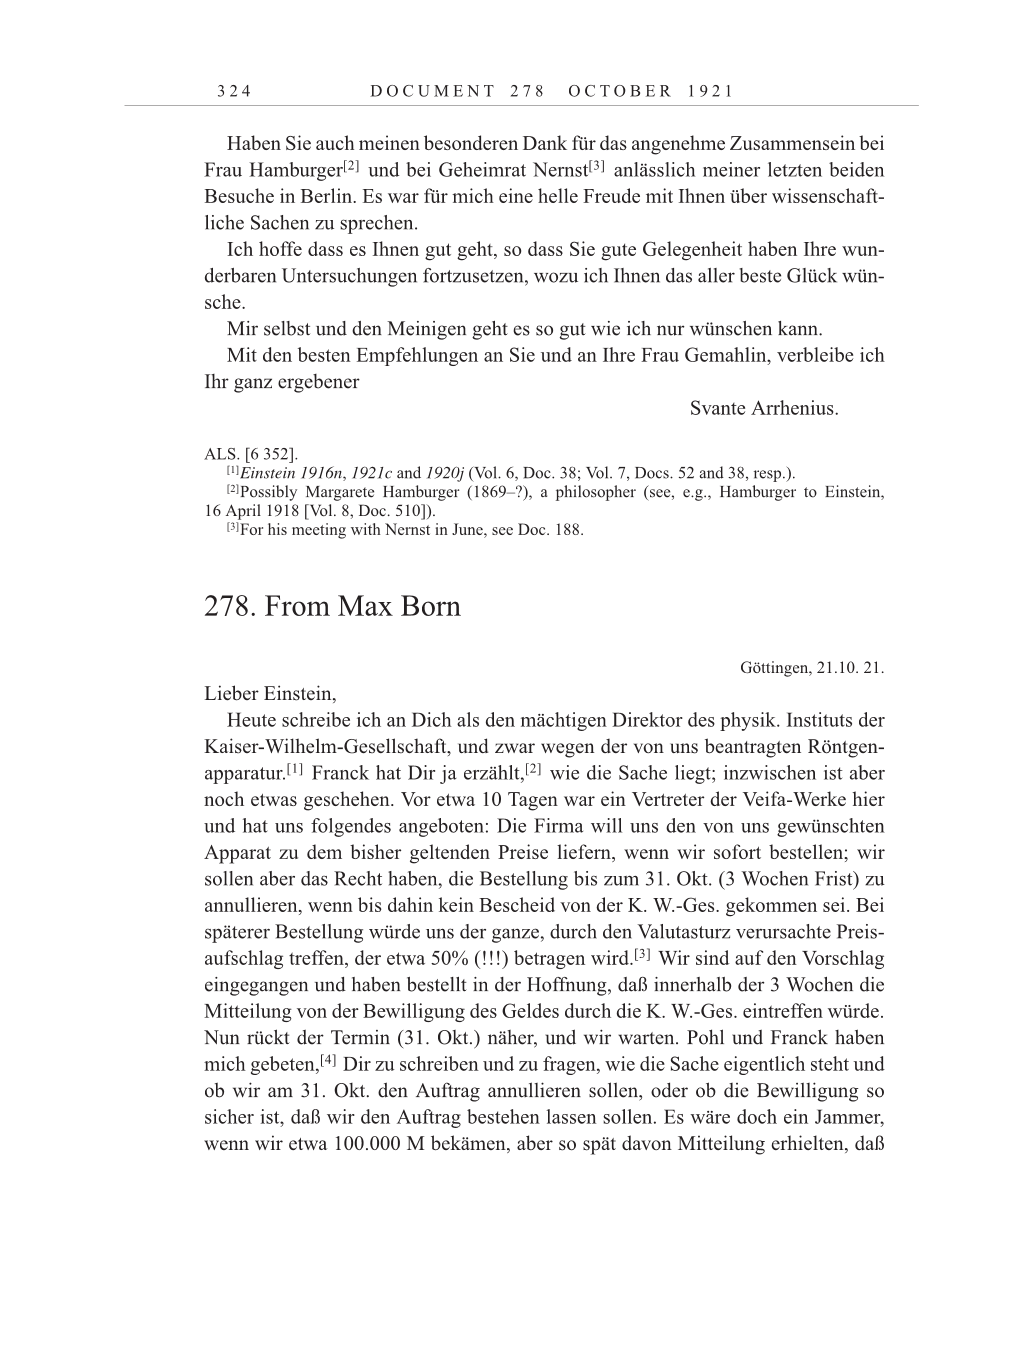 Volume 12: The Berlin Years: Correspondence January-December 1921 page 324